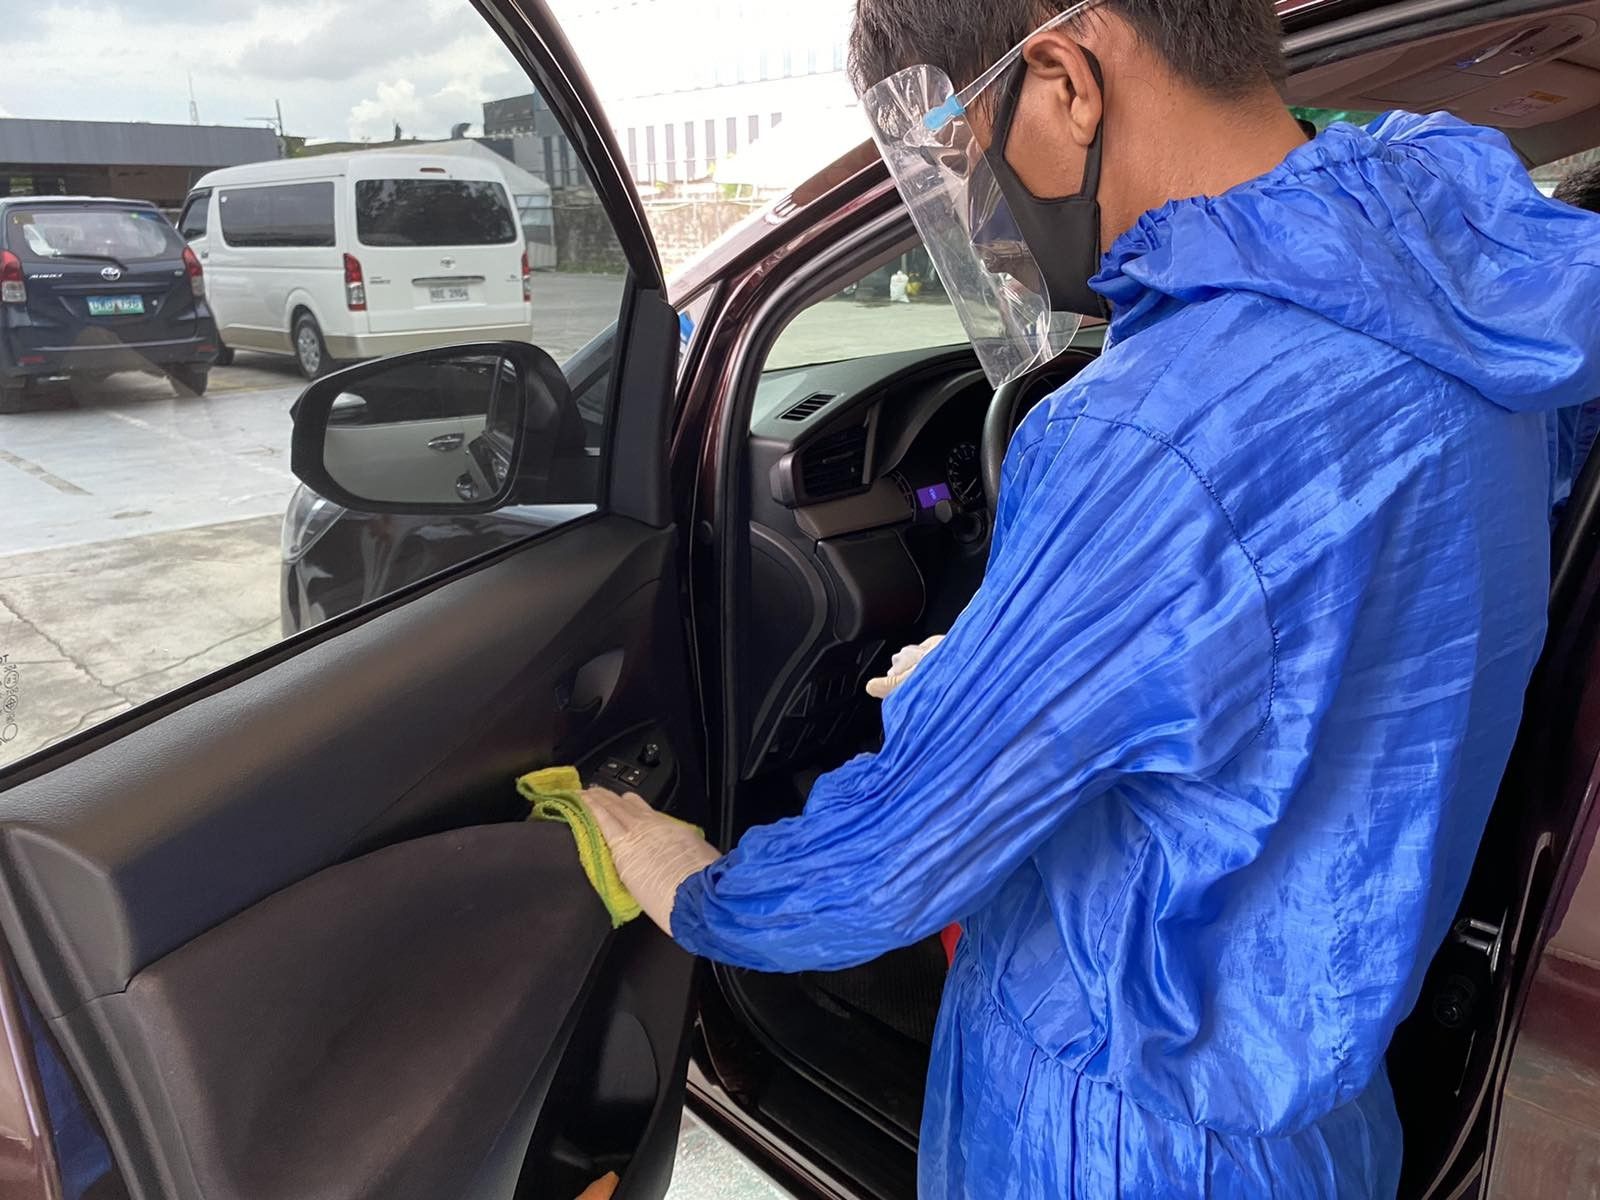 Did you know? You can now get express car sanitation at Toyota!